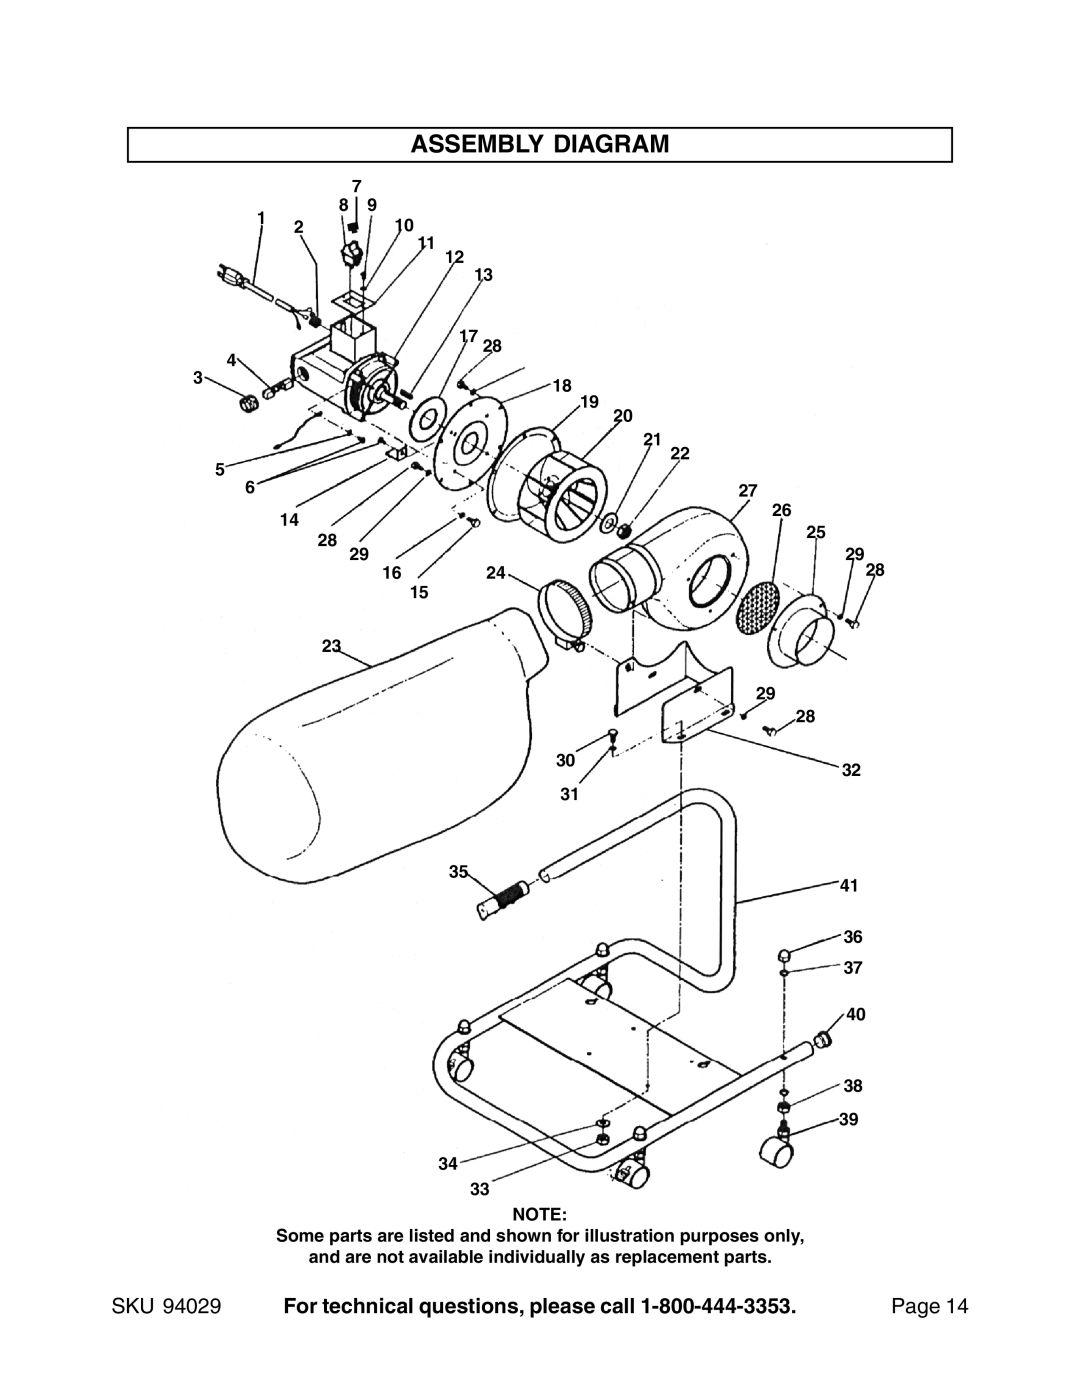 Harbor Freight Tools 94029 operating instructions Assembly Diagram 